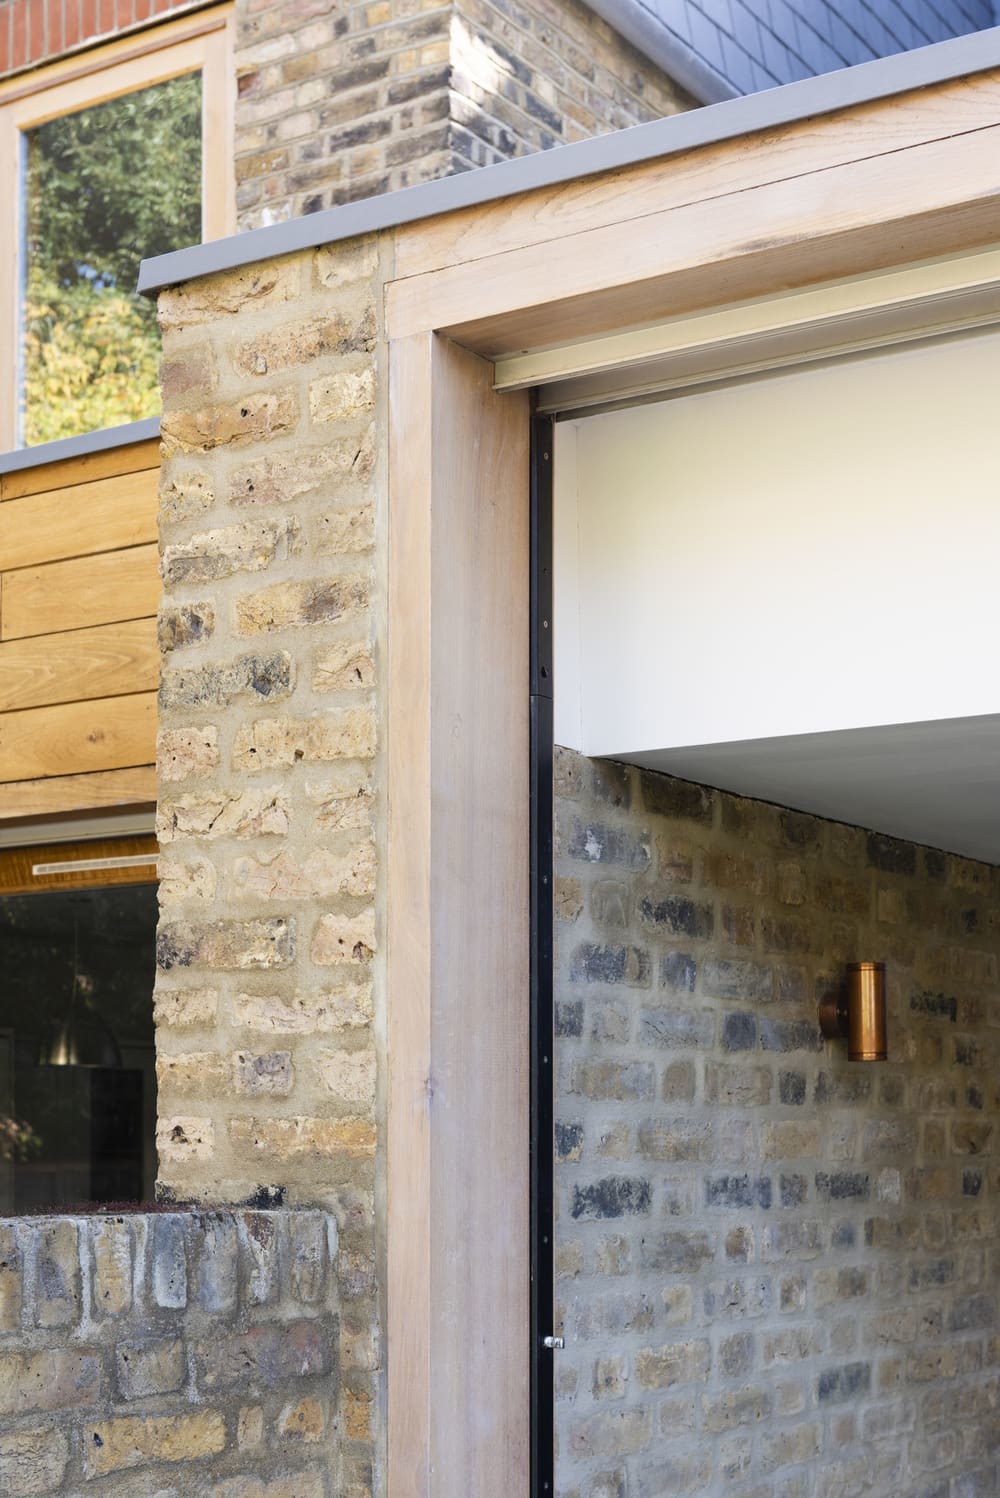 Refurbishment and Extension of Neighbouring Houses in Islington, London